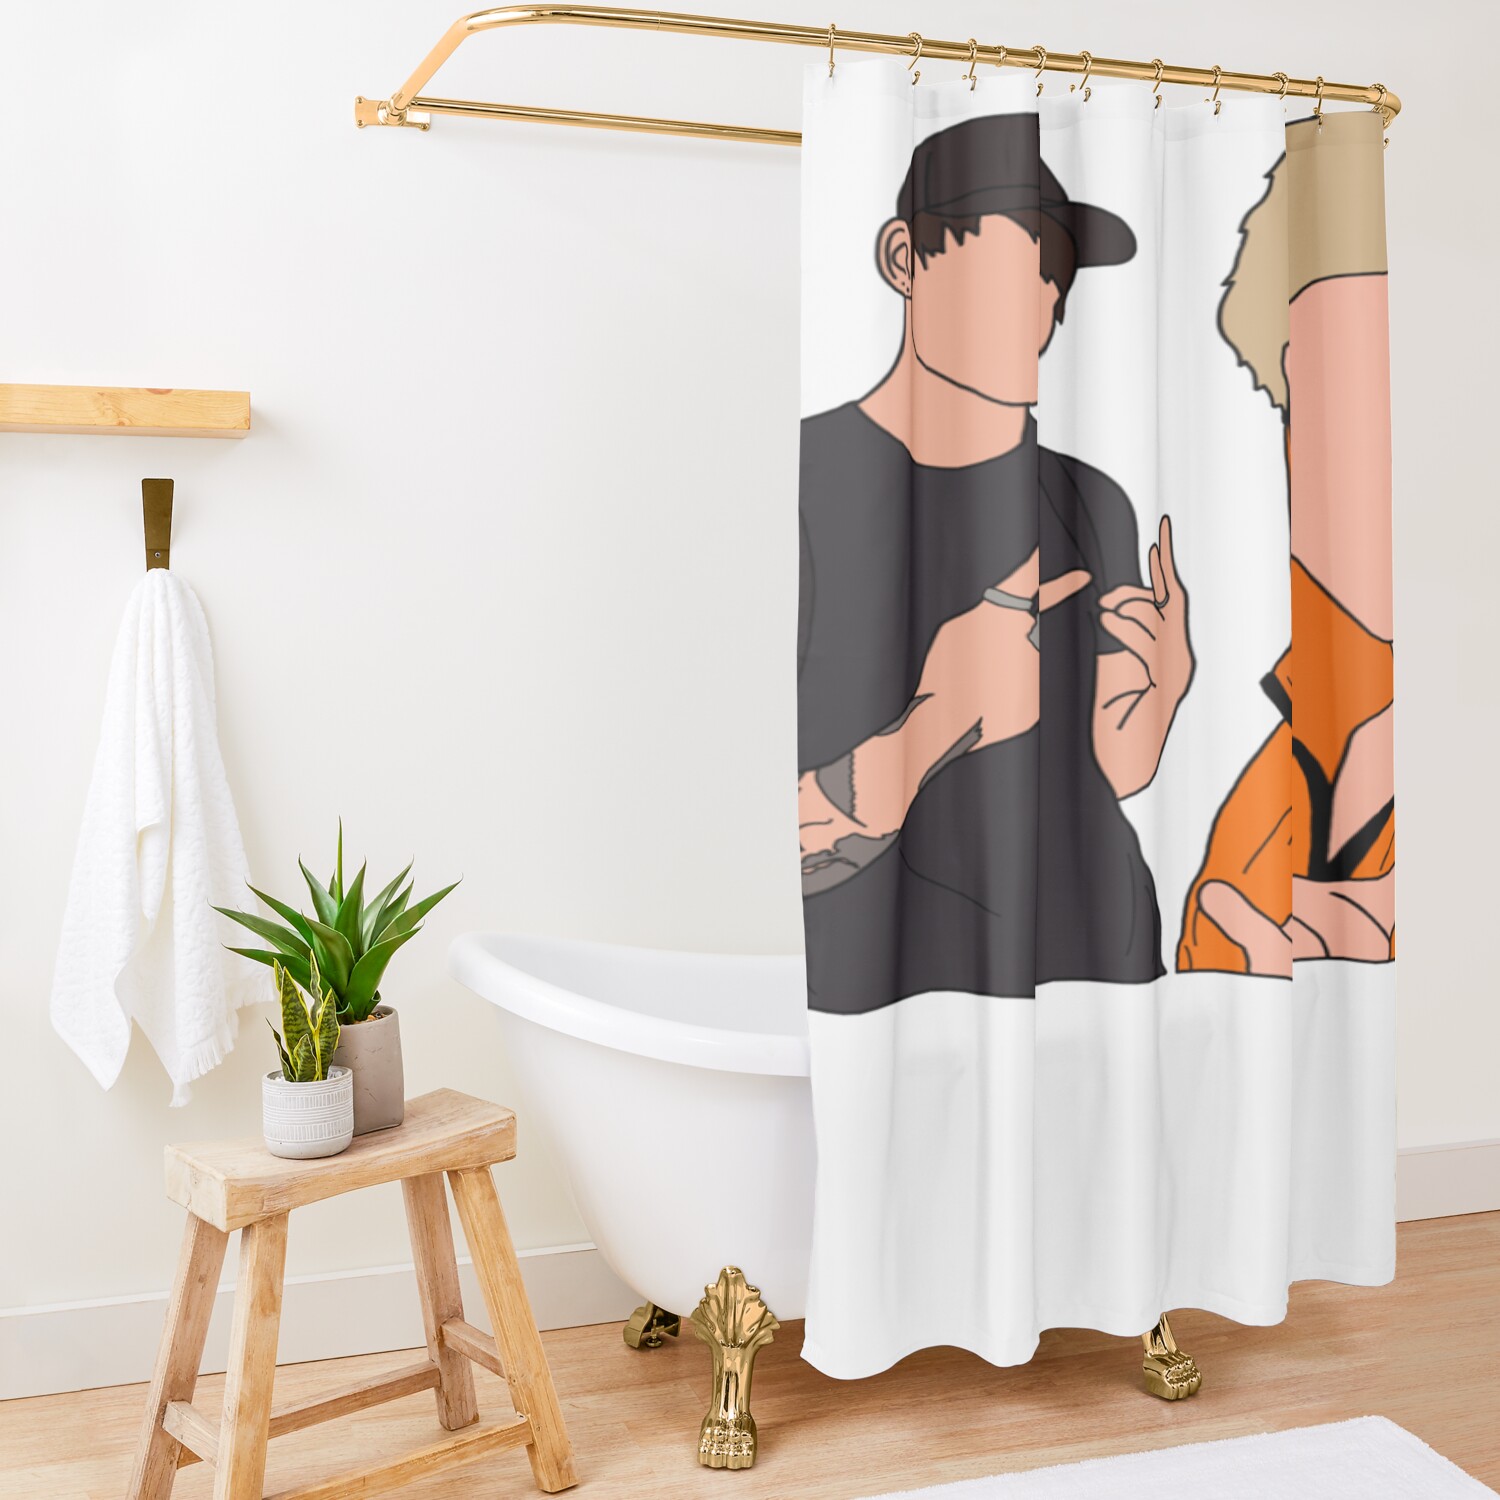 urshower curtain opensquare1500x1500 2 - Sam And Colby Shop